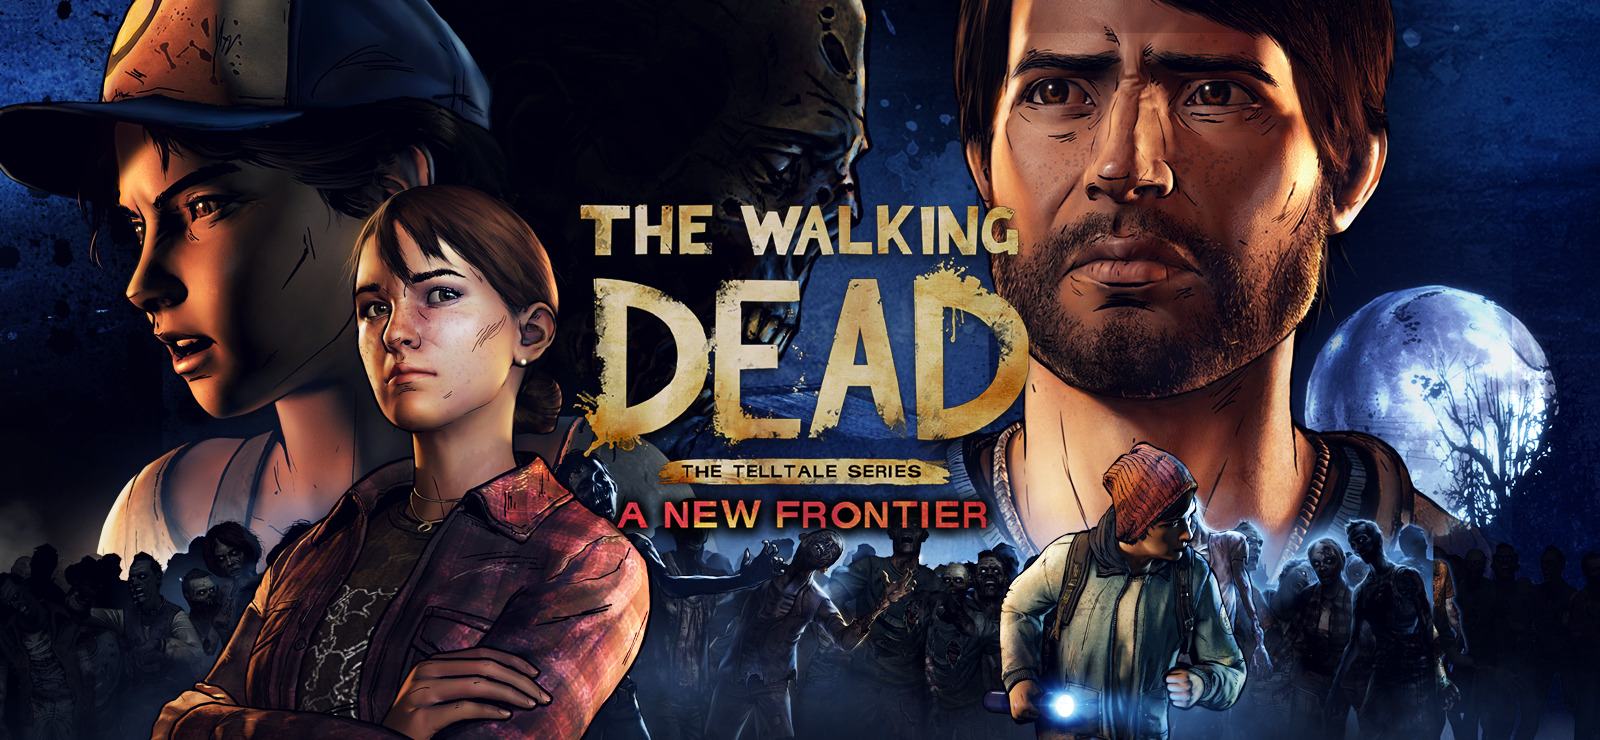 is the new walking dead game single player